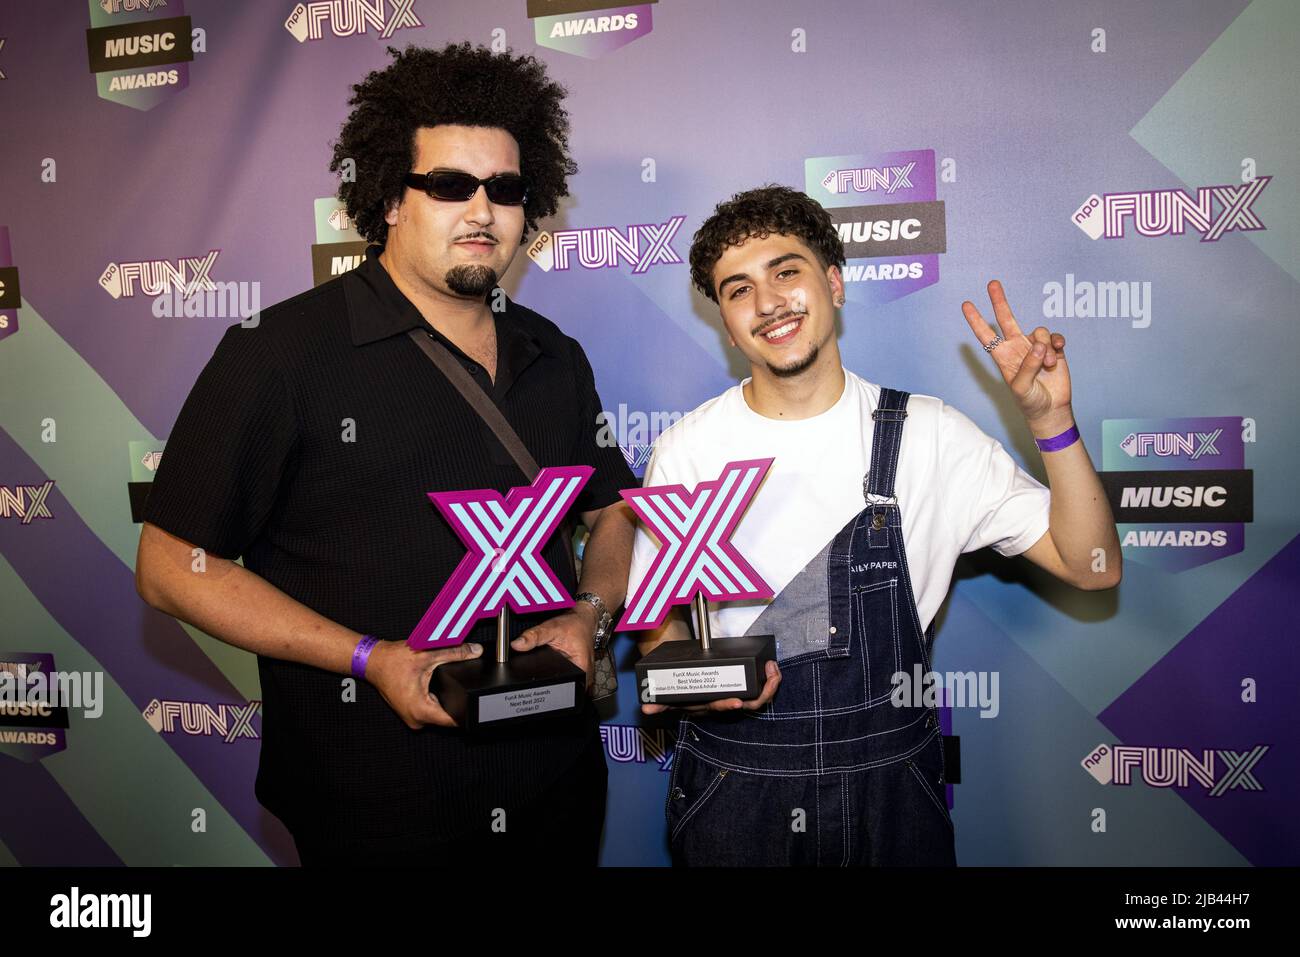 2022-06-02 22:57:07 AMSTERDAM - Cristian D wins the next best and best video award during the FunX Music Awards in AFAS Live in Amsterdam. During the award show, the most important music prizes of the young Netherlands were presented. ANP RAMON VAN FLYMEN netherlands out - belgium out Stock Photo